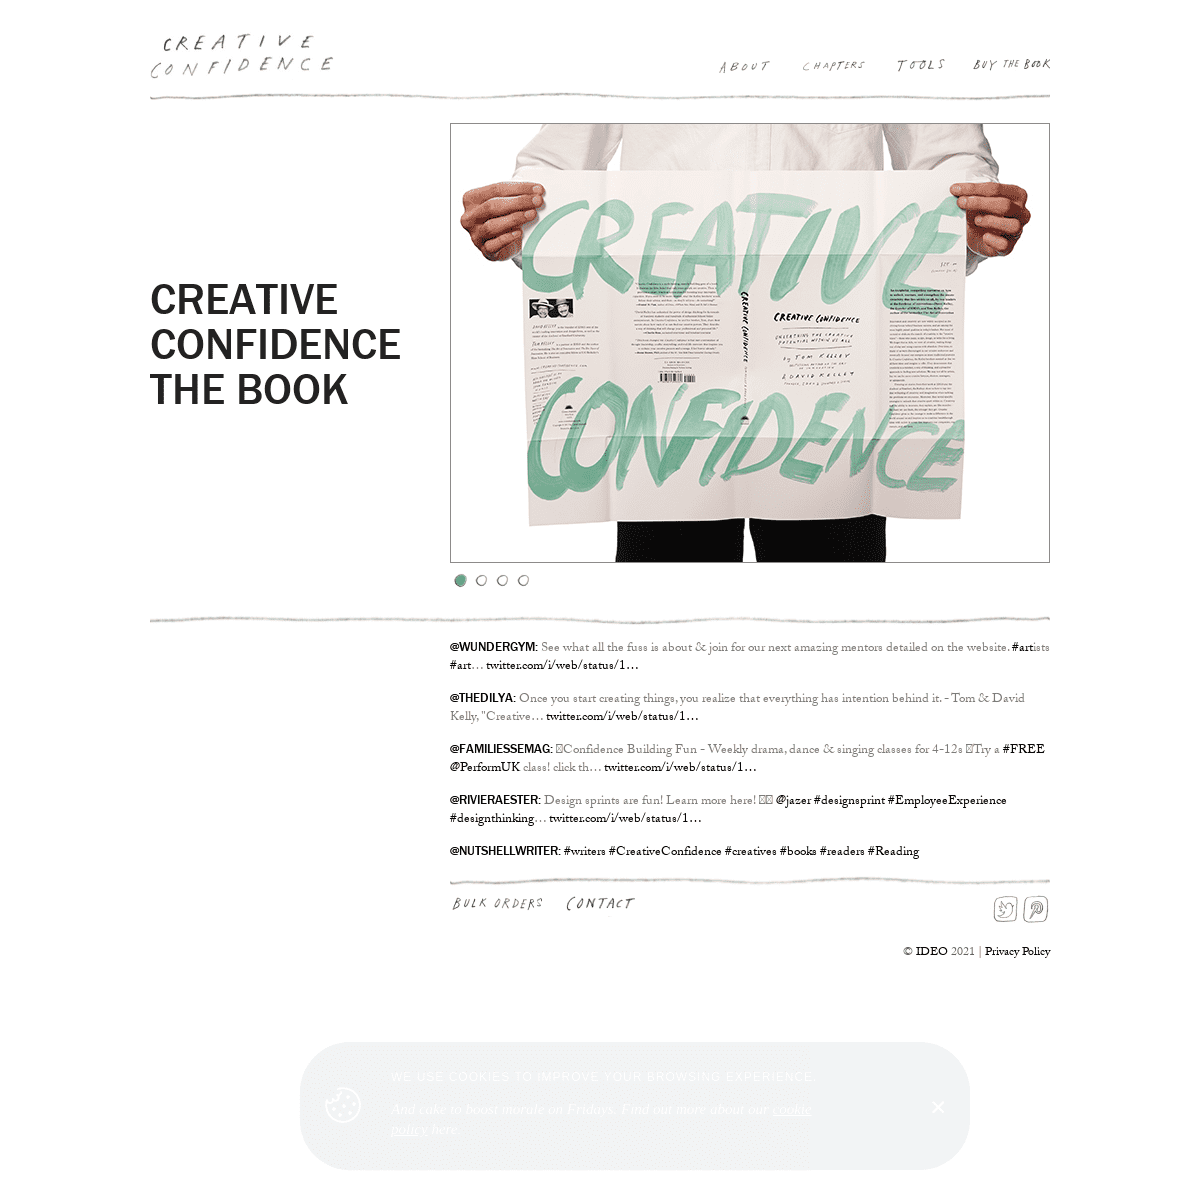 A complete backup of https://creativeconfidence.com